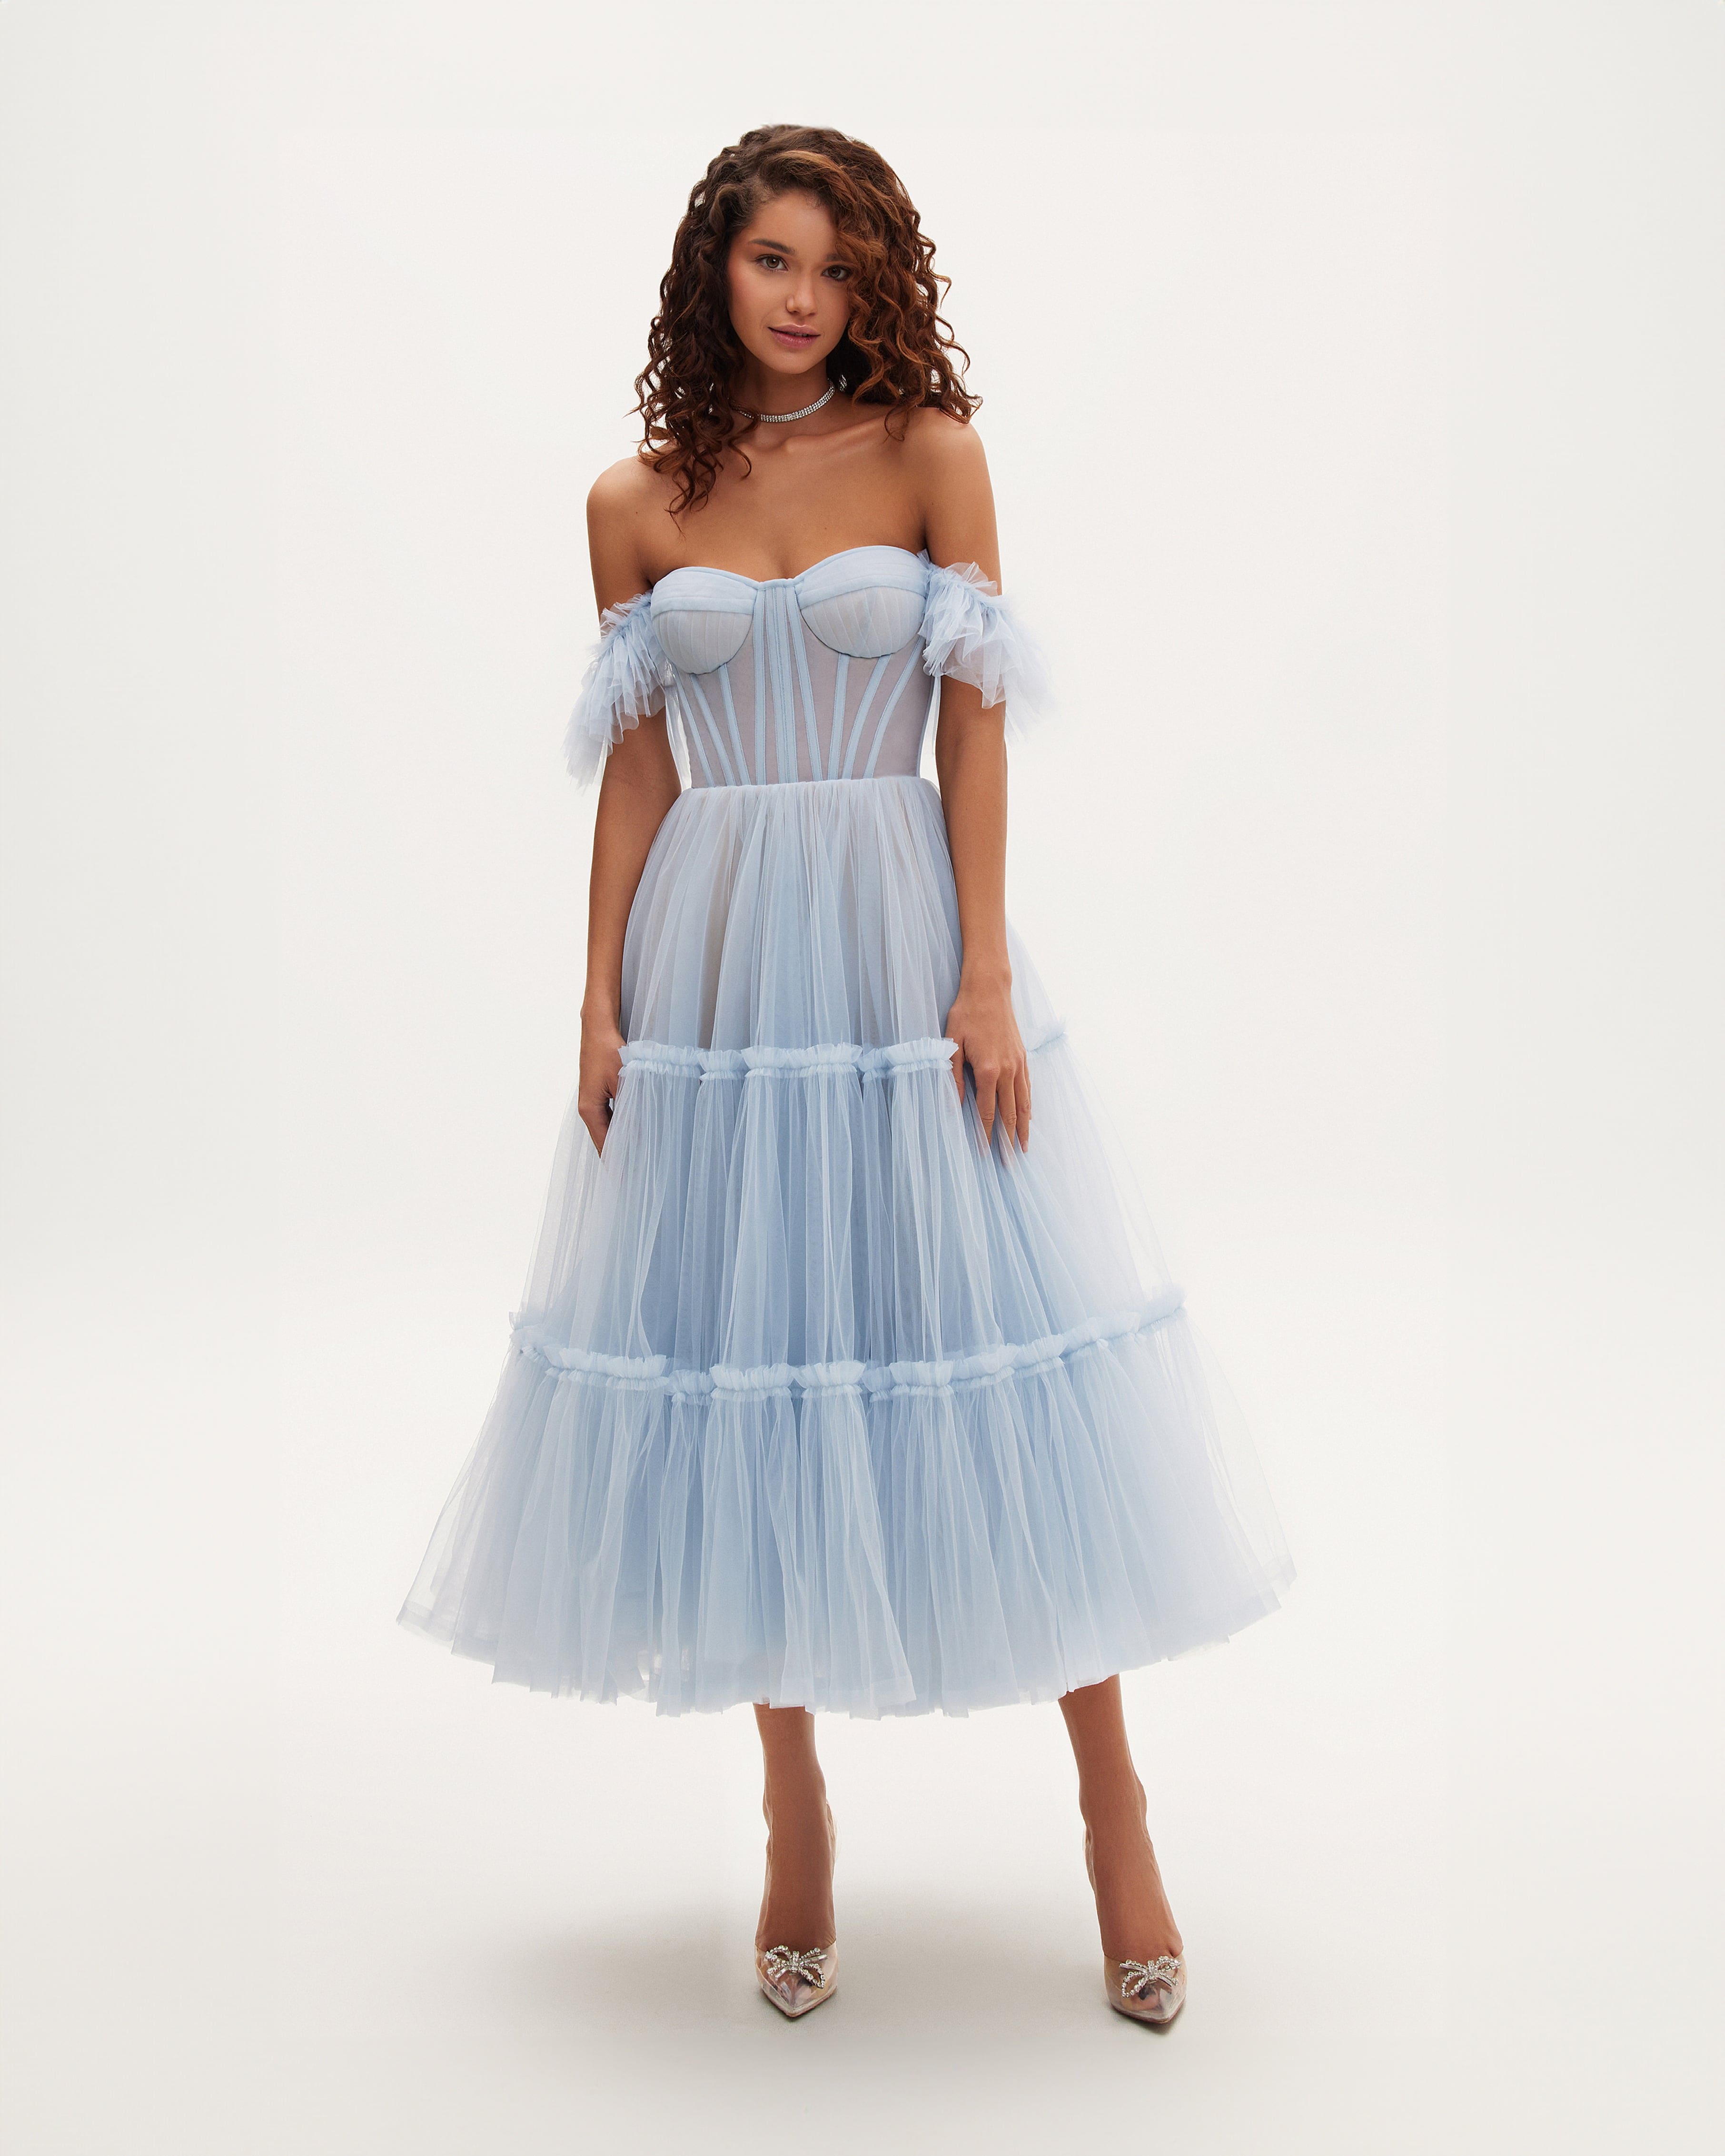 Blue Dresses ➤ Milla Dresses - USA, Worldwide delivery